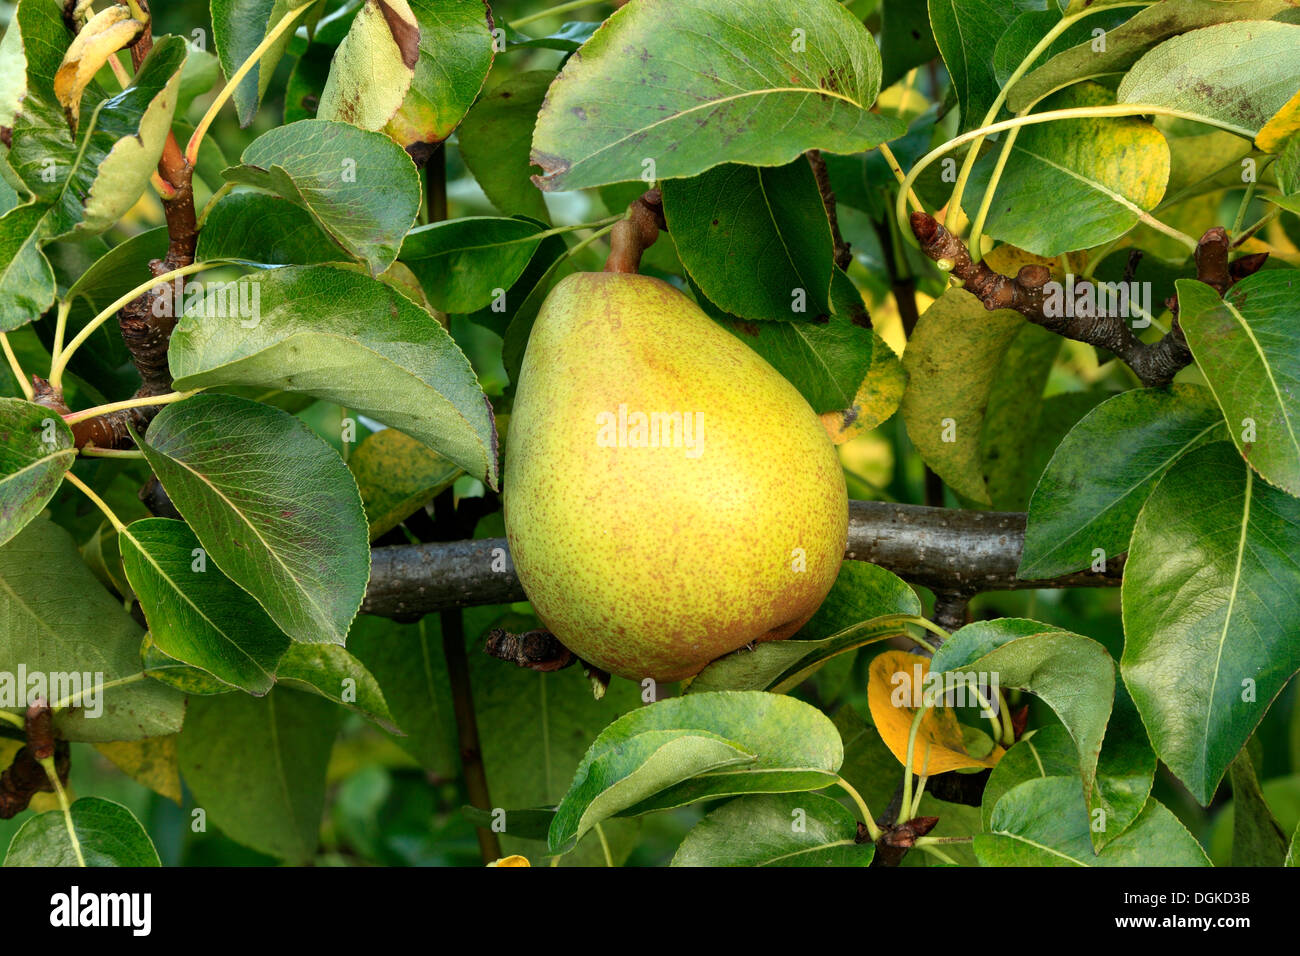 Pear 'Doyenne du Comice', Pyrus communis, named variety growing on tree, pears Stock Photo